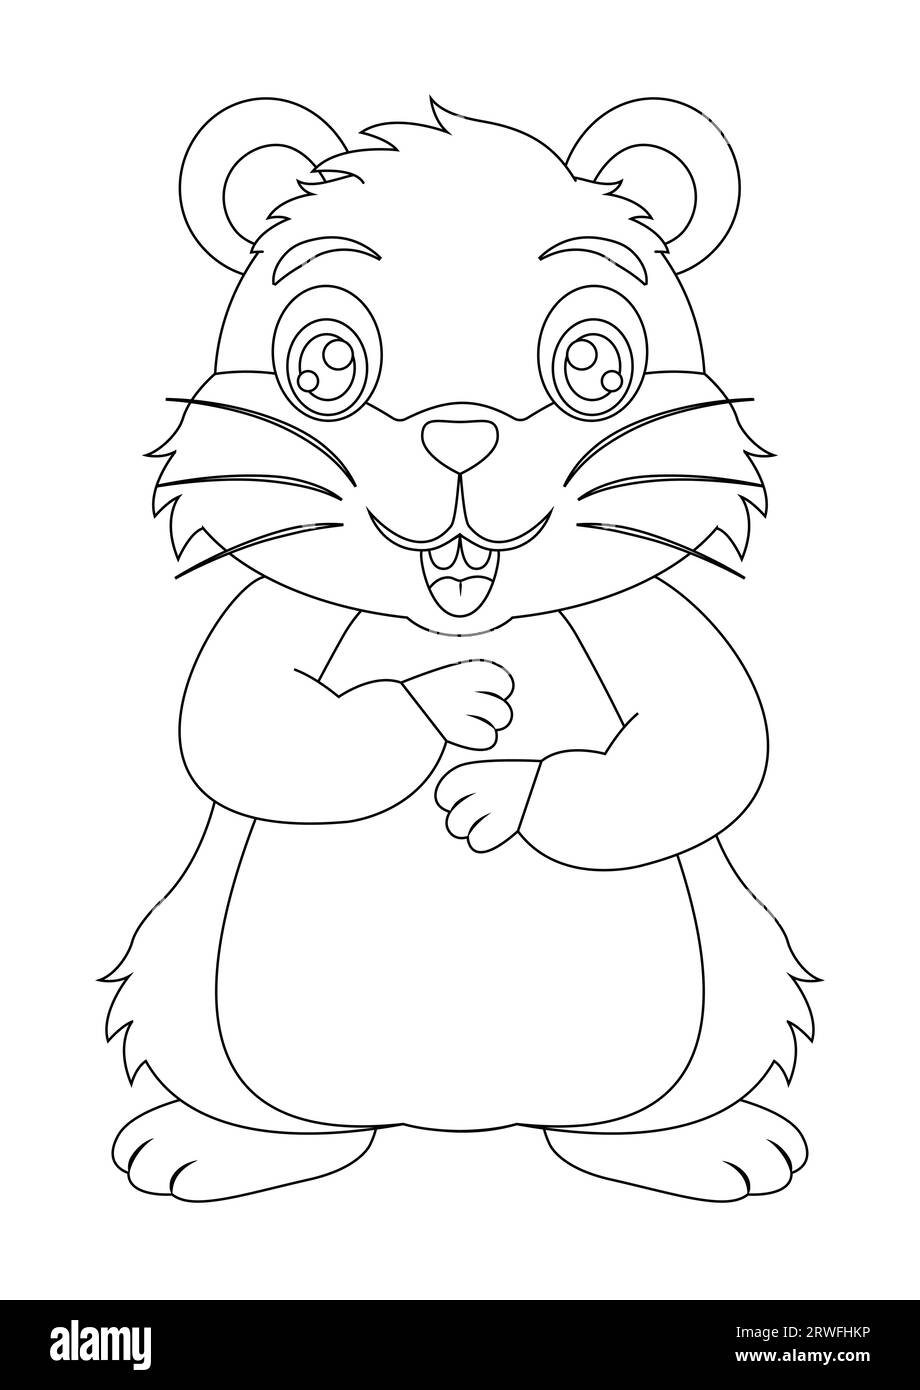 Black and white cute hamster cartoon character vector illustration. Coloring page of cartoon cute smiling hamster Stock Vector